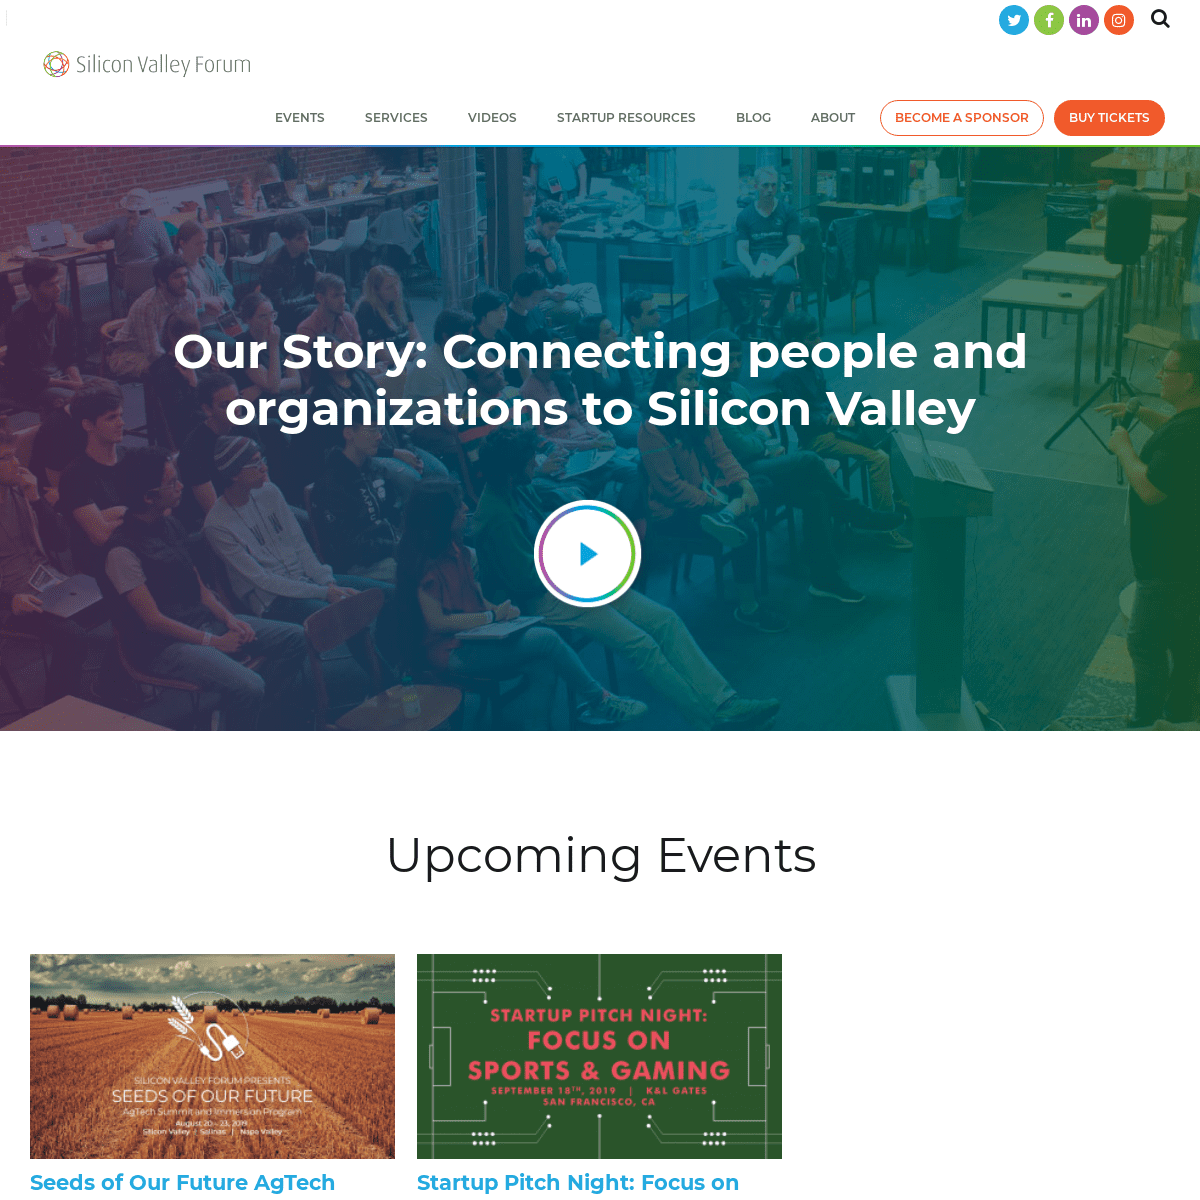 Silicon Valley Forum | For the best in Silicon Valley events